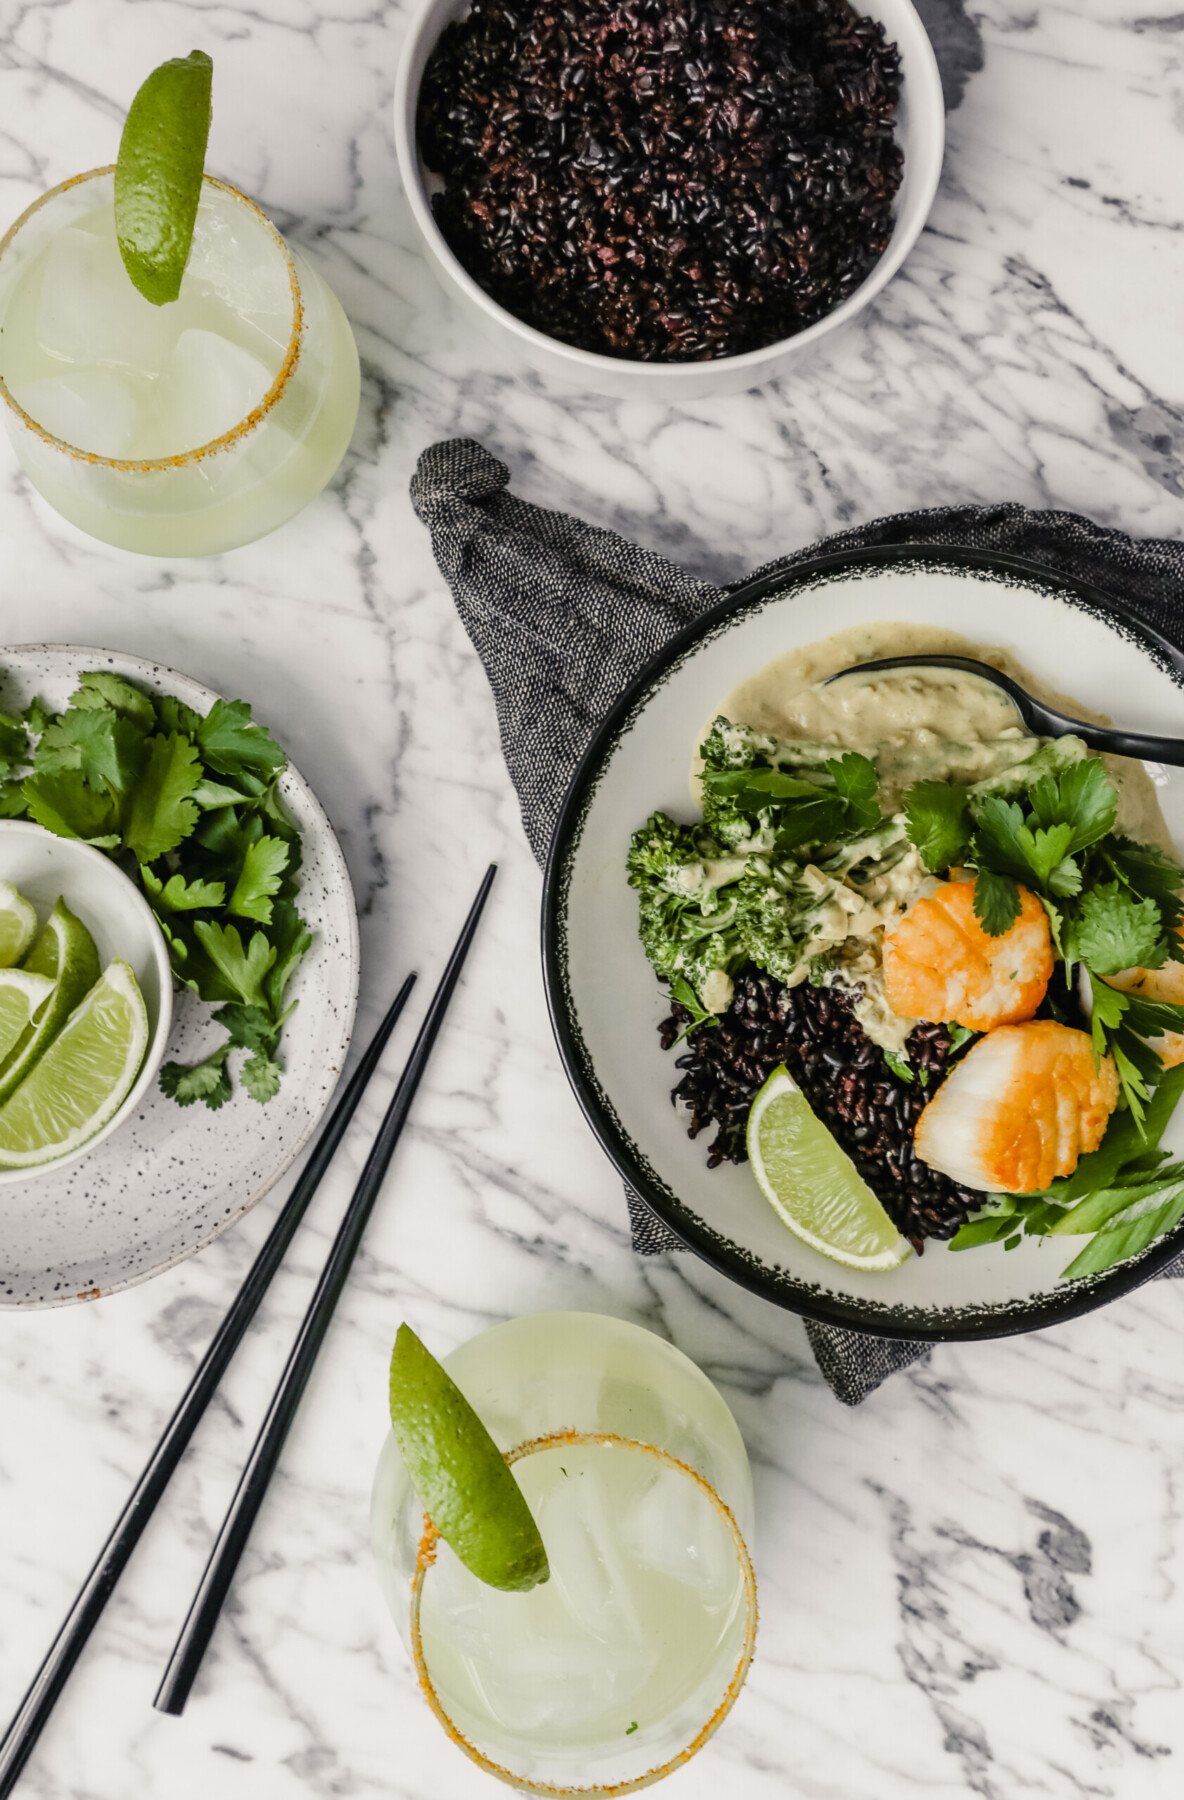 Photograph of a bowl filled with green coconut curry, black rice, broccolini and golden scallops set on a marble table with a gray napkin and margaritas set around.